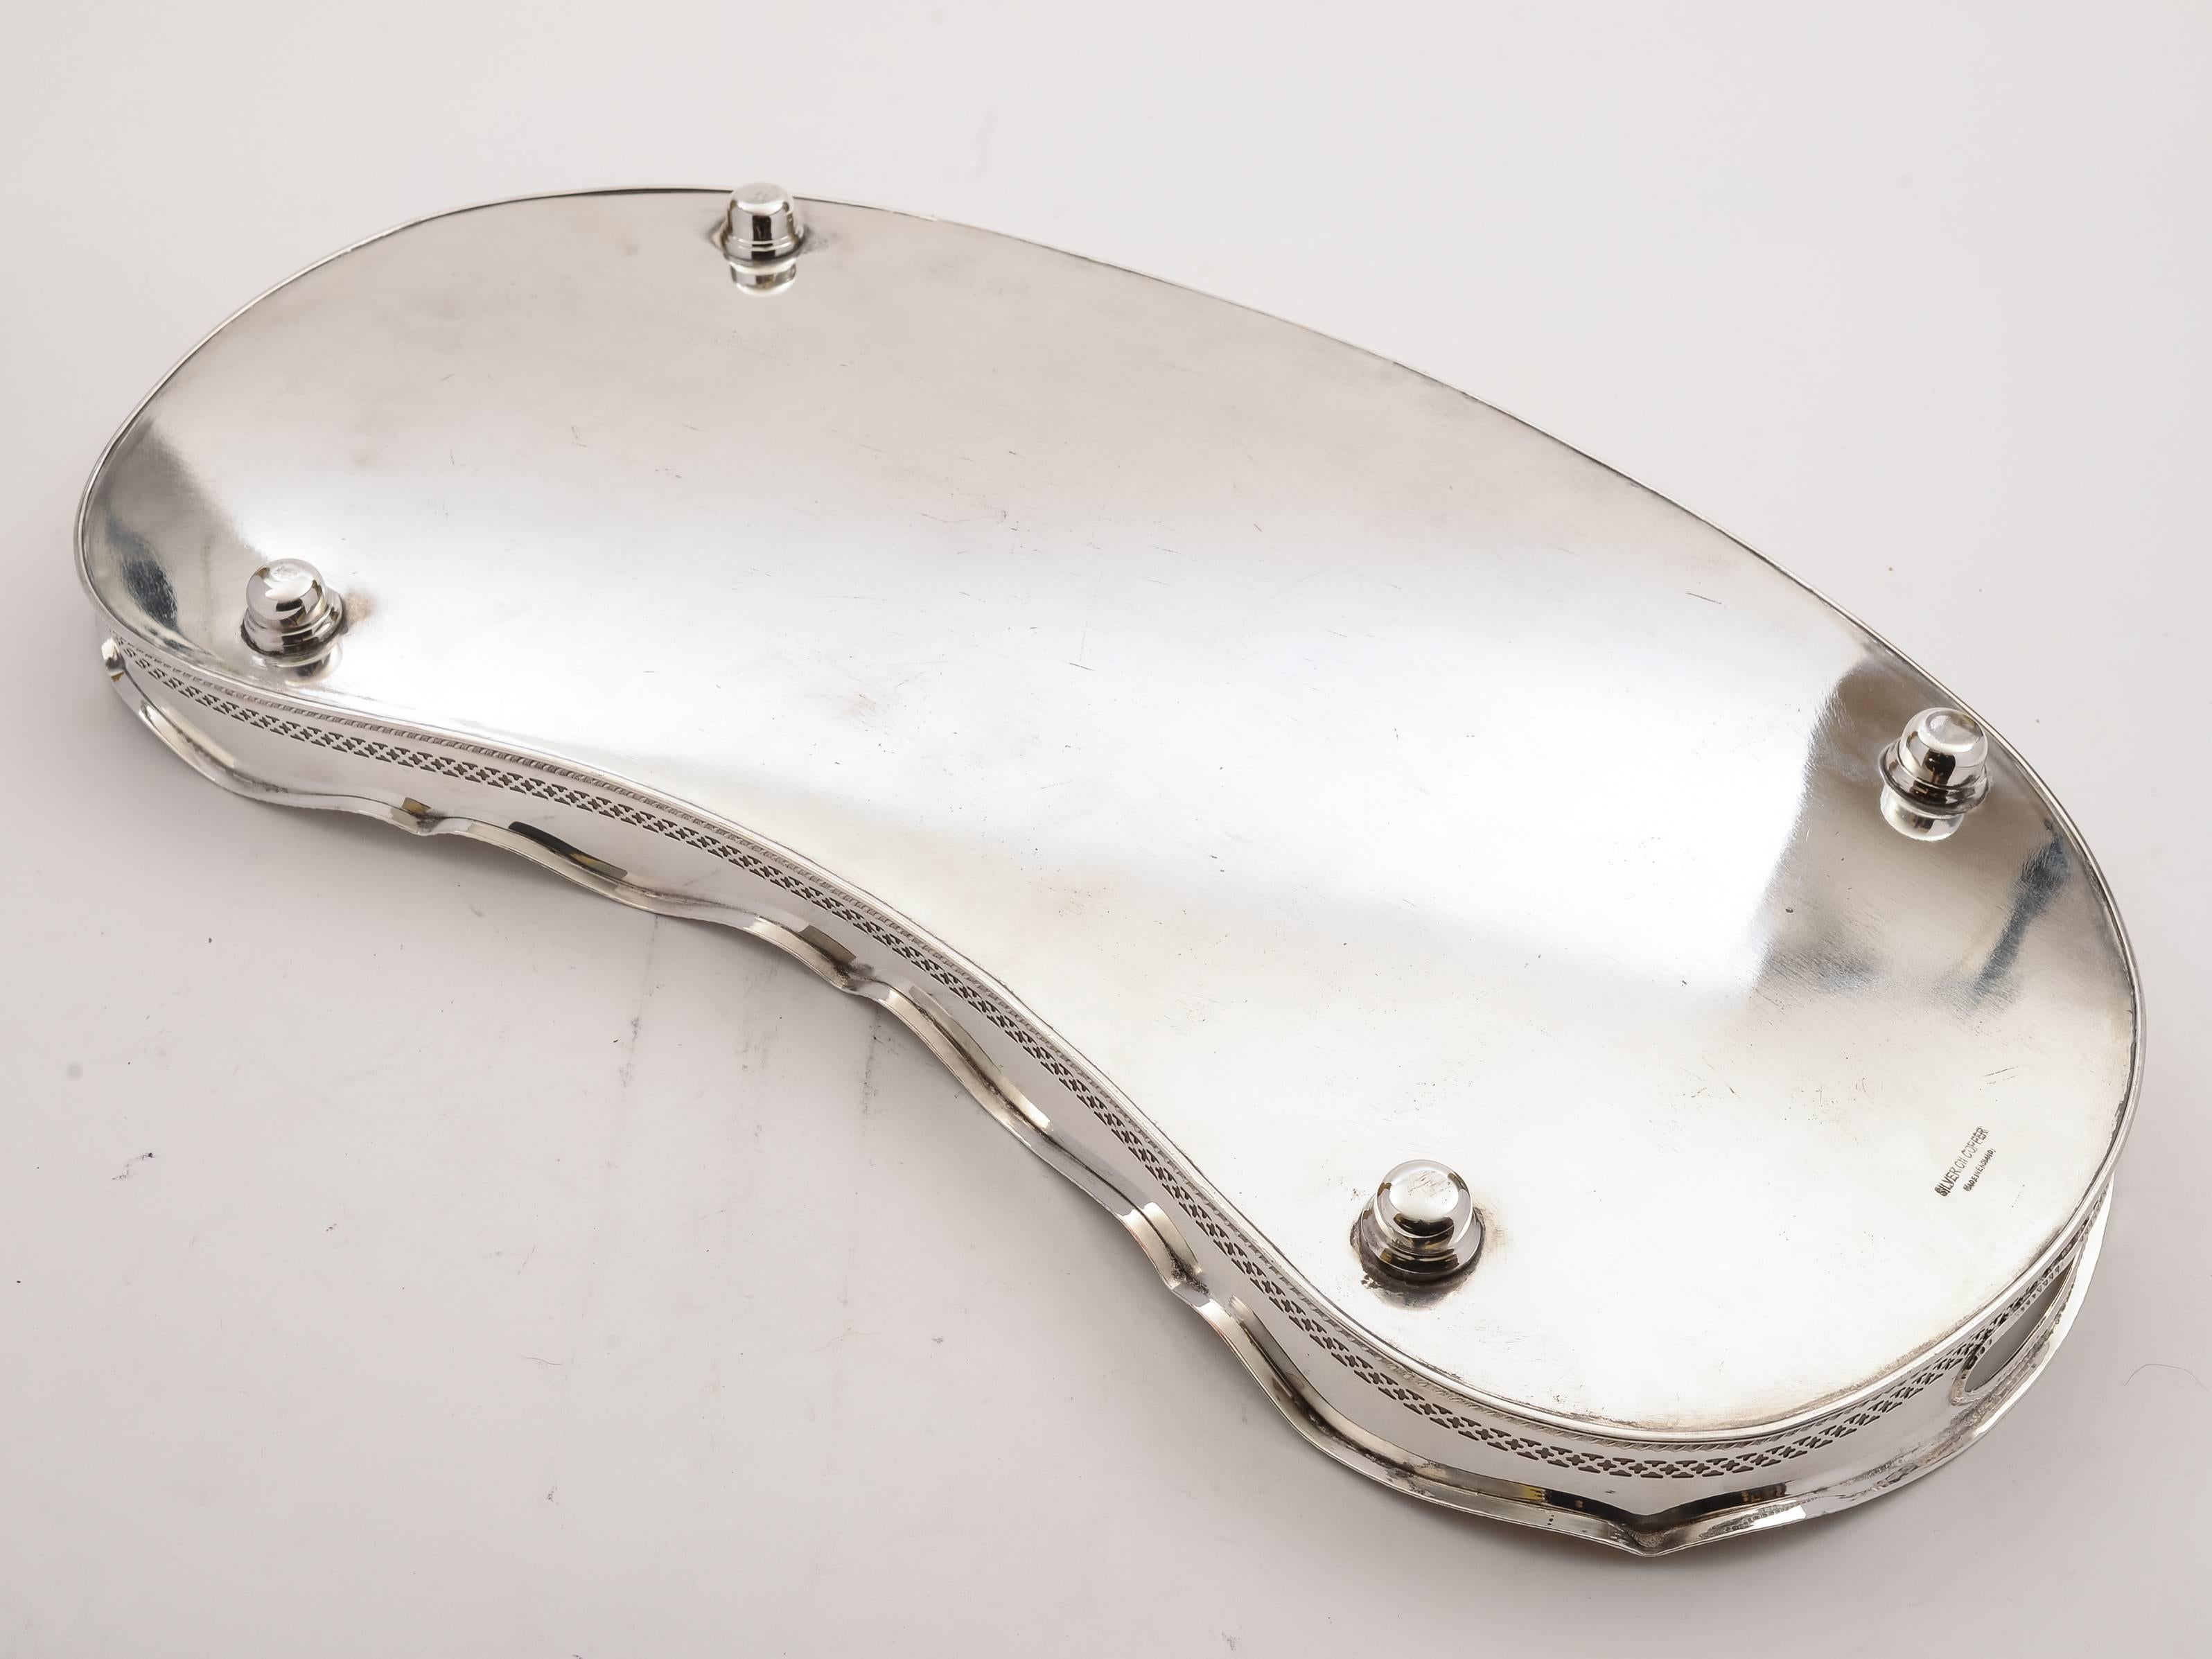 A good English Edwardian silver plated kidney shaped gallery tray with pierced gallery, cut out handles and stands on 4 round feet. Circa 1905.

FREE worldwide delivery. 

Measurements:
Height: 1 1/2" (approx 3.75cm)
Length: 24" (approx